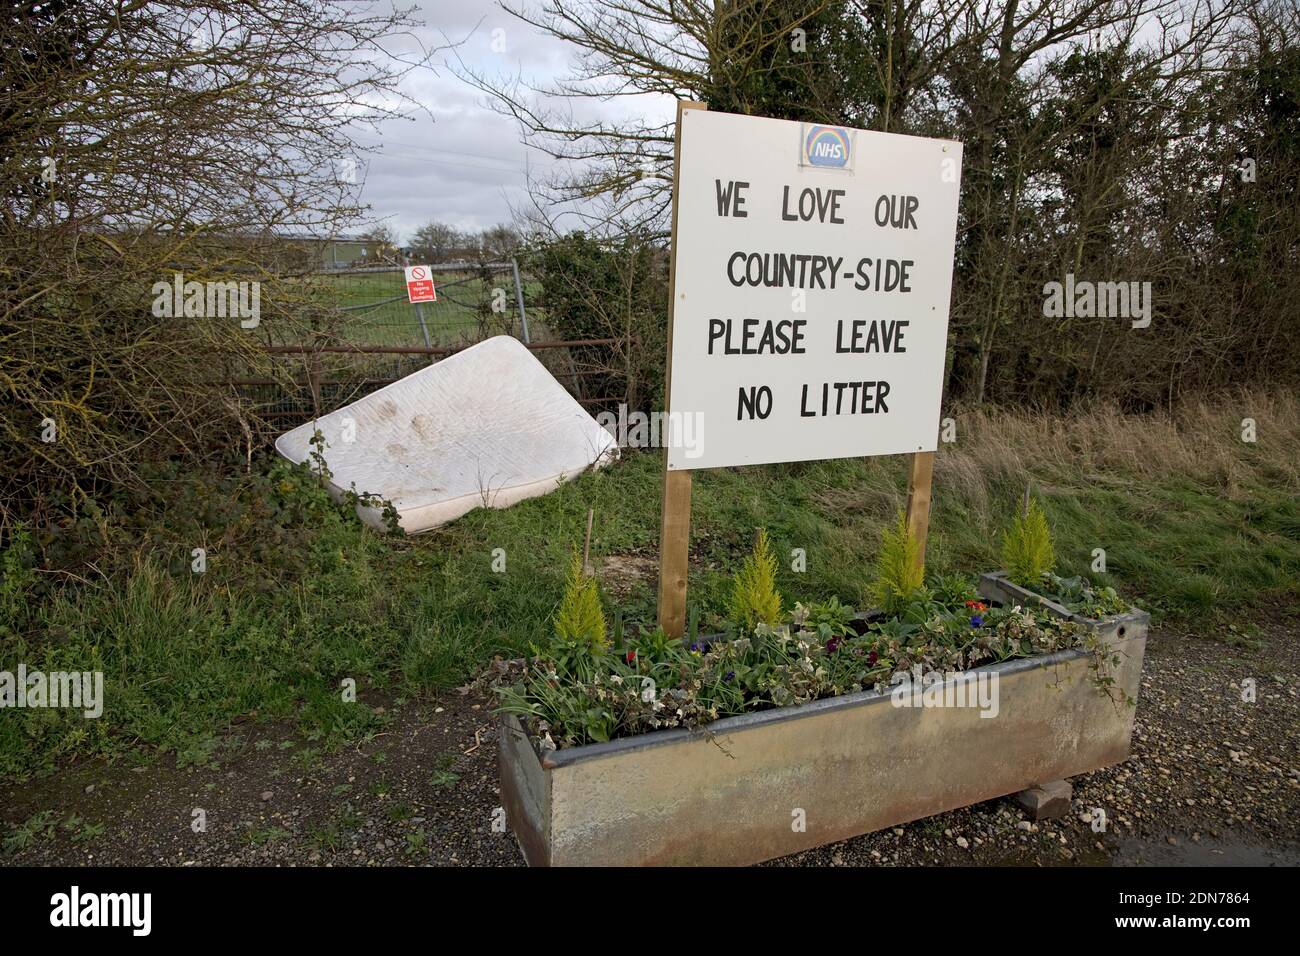 Old mattress dumped by two no litter signs in rural Warwickshire UK Stock Photo